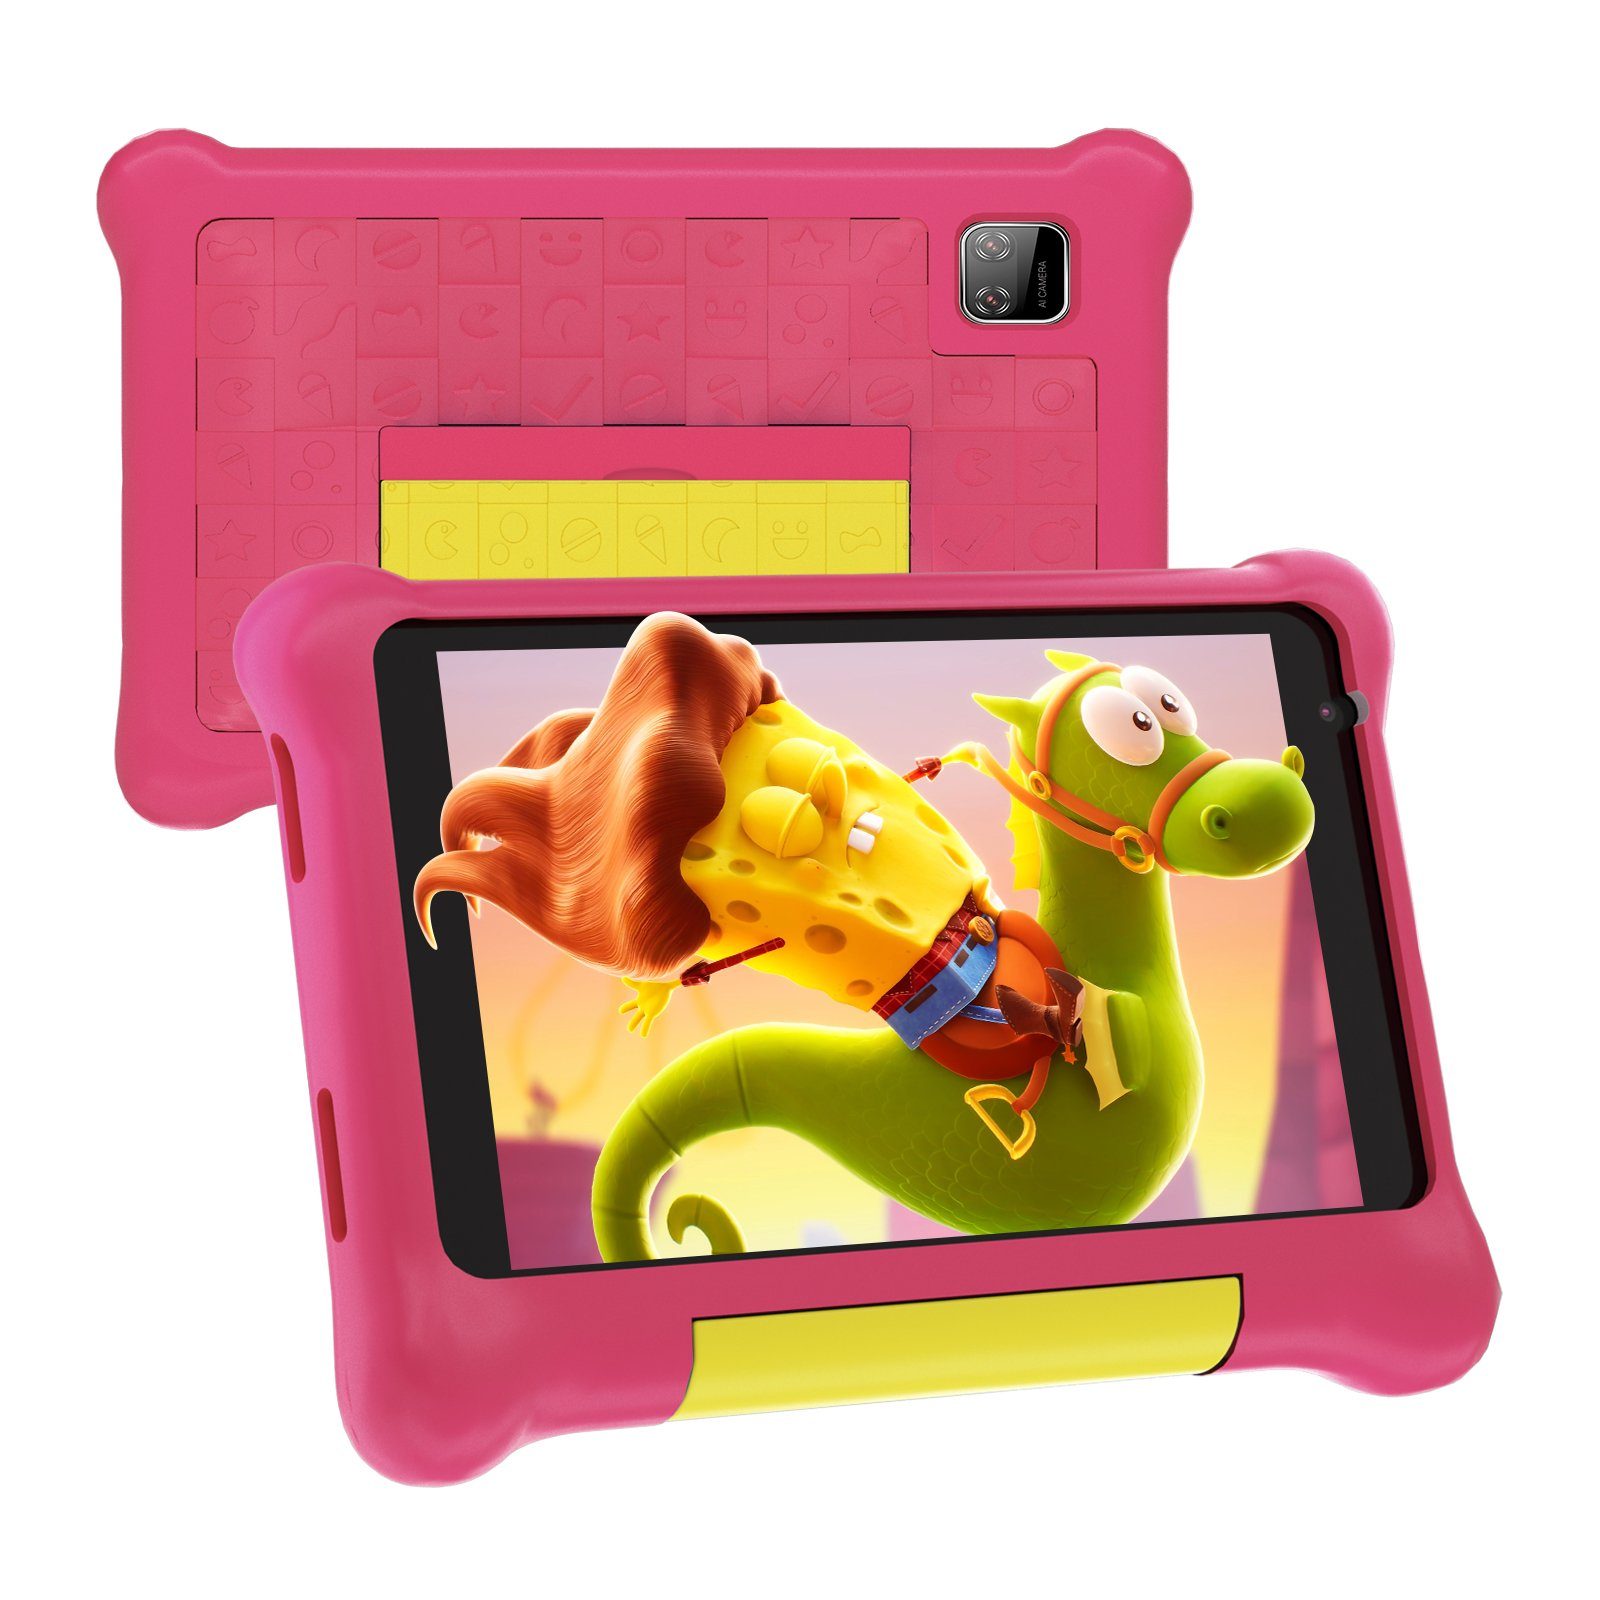 Tablet 12, TK707 GB, leicht, pink Happybe (7", Android kindersicher) 32